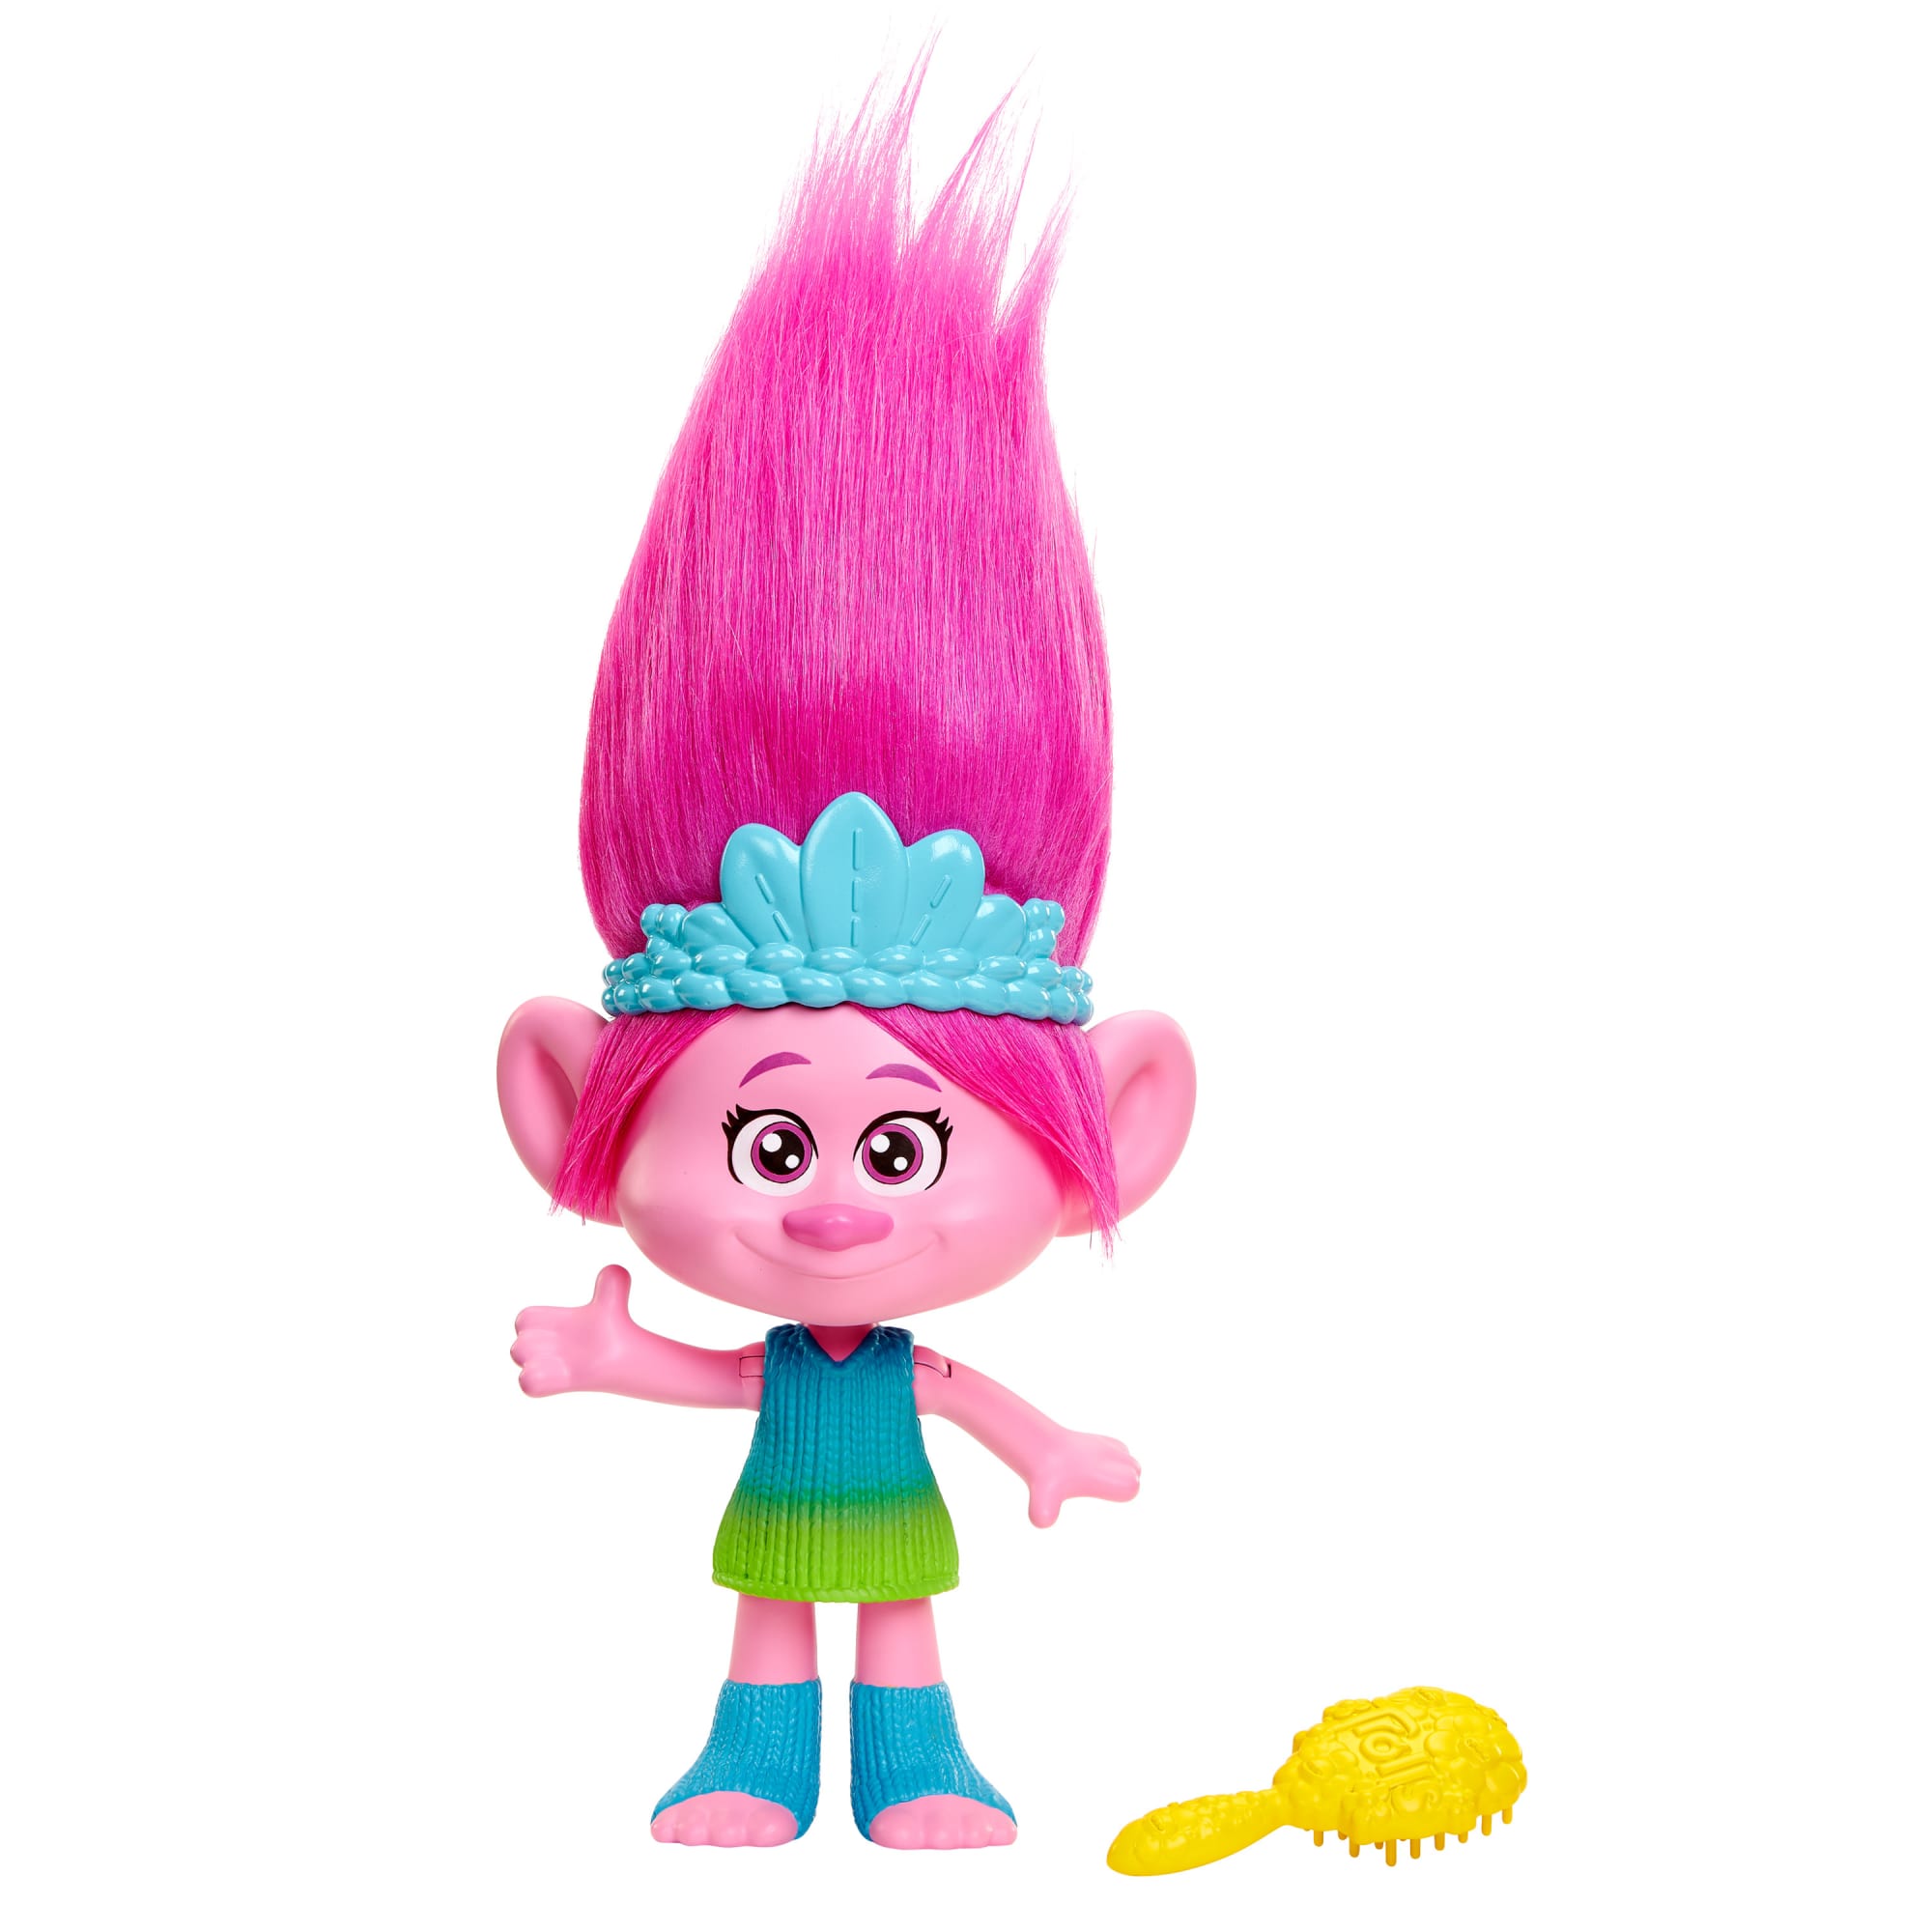 Poppy Playtime 3 Reveals New Monster - But Who Is It?